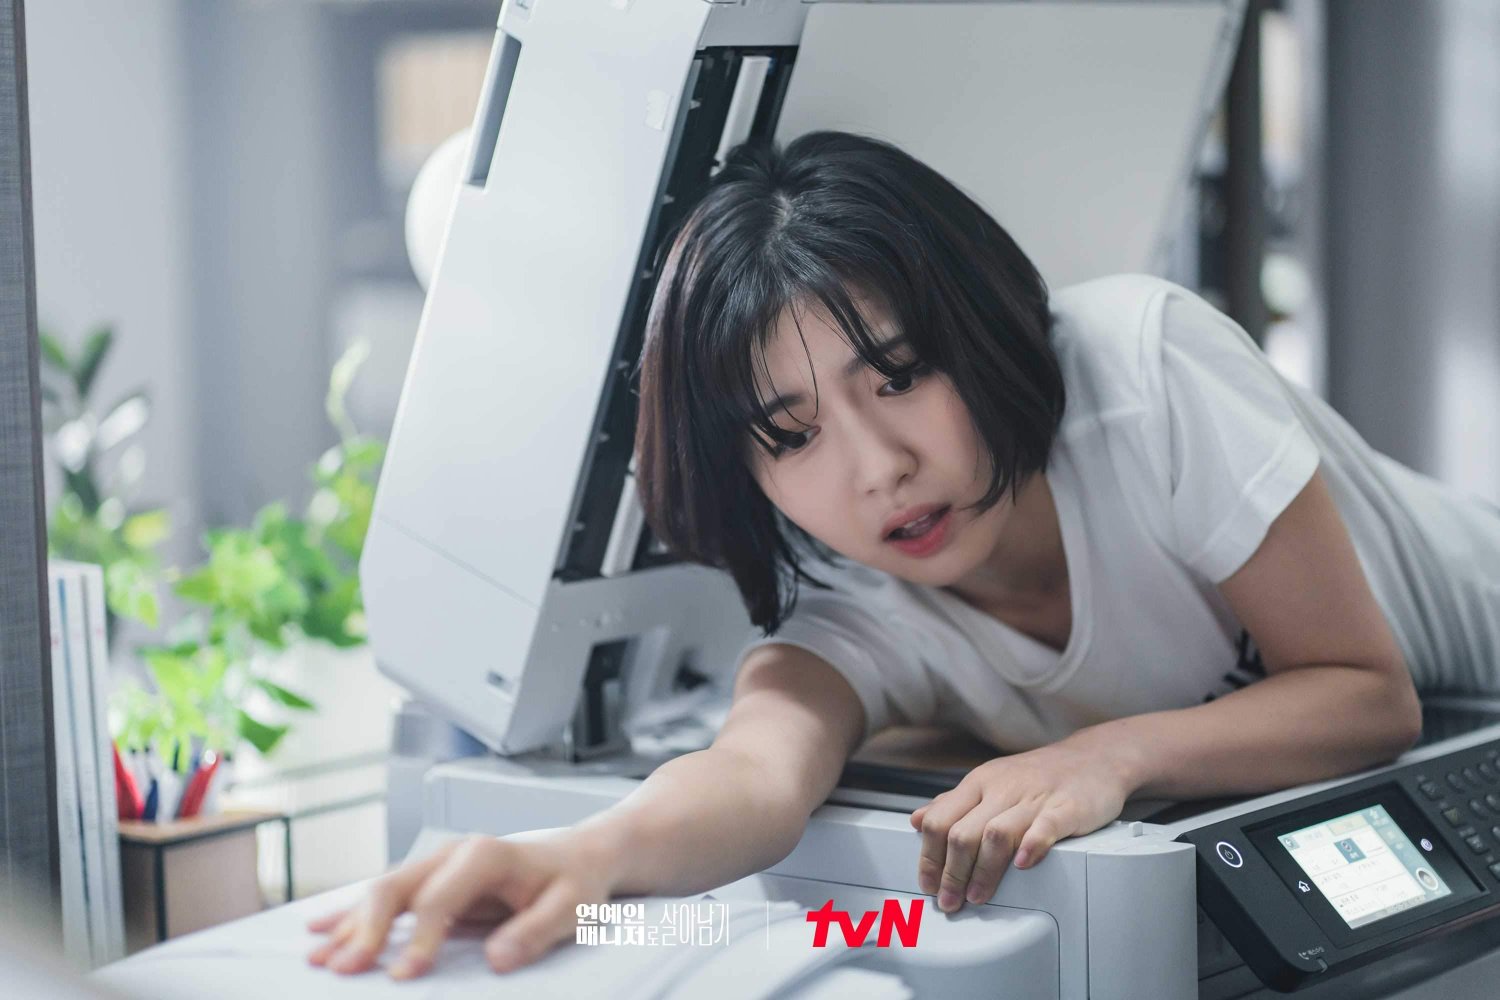 Chaos and hard work are Behind Every Star in new stills for tvN comedy